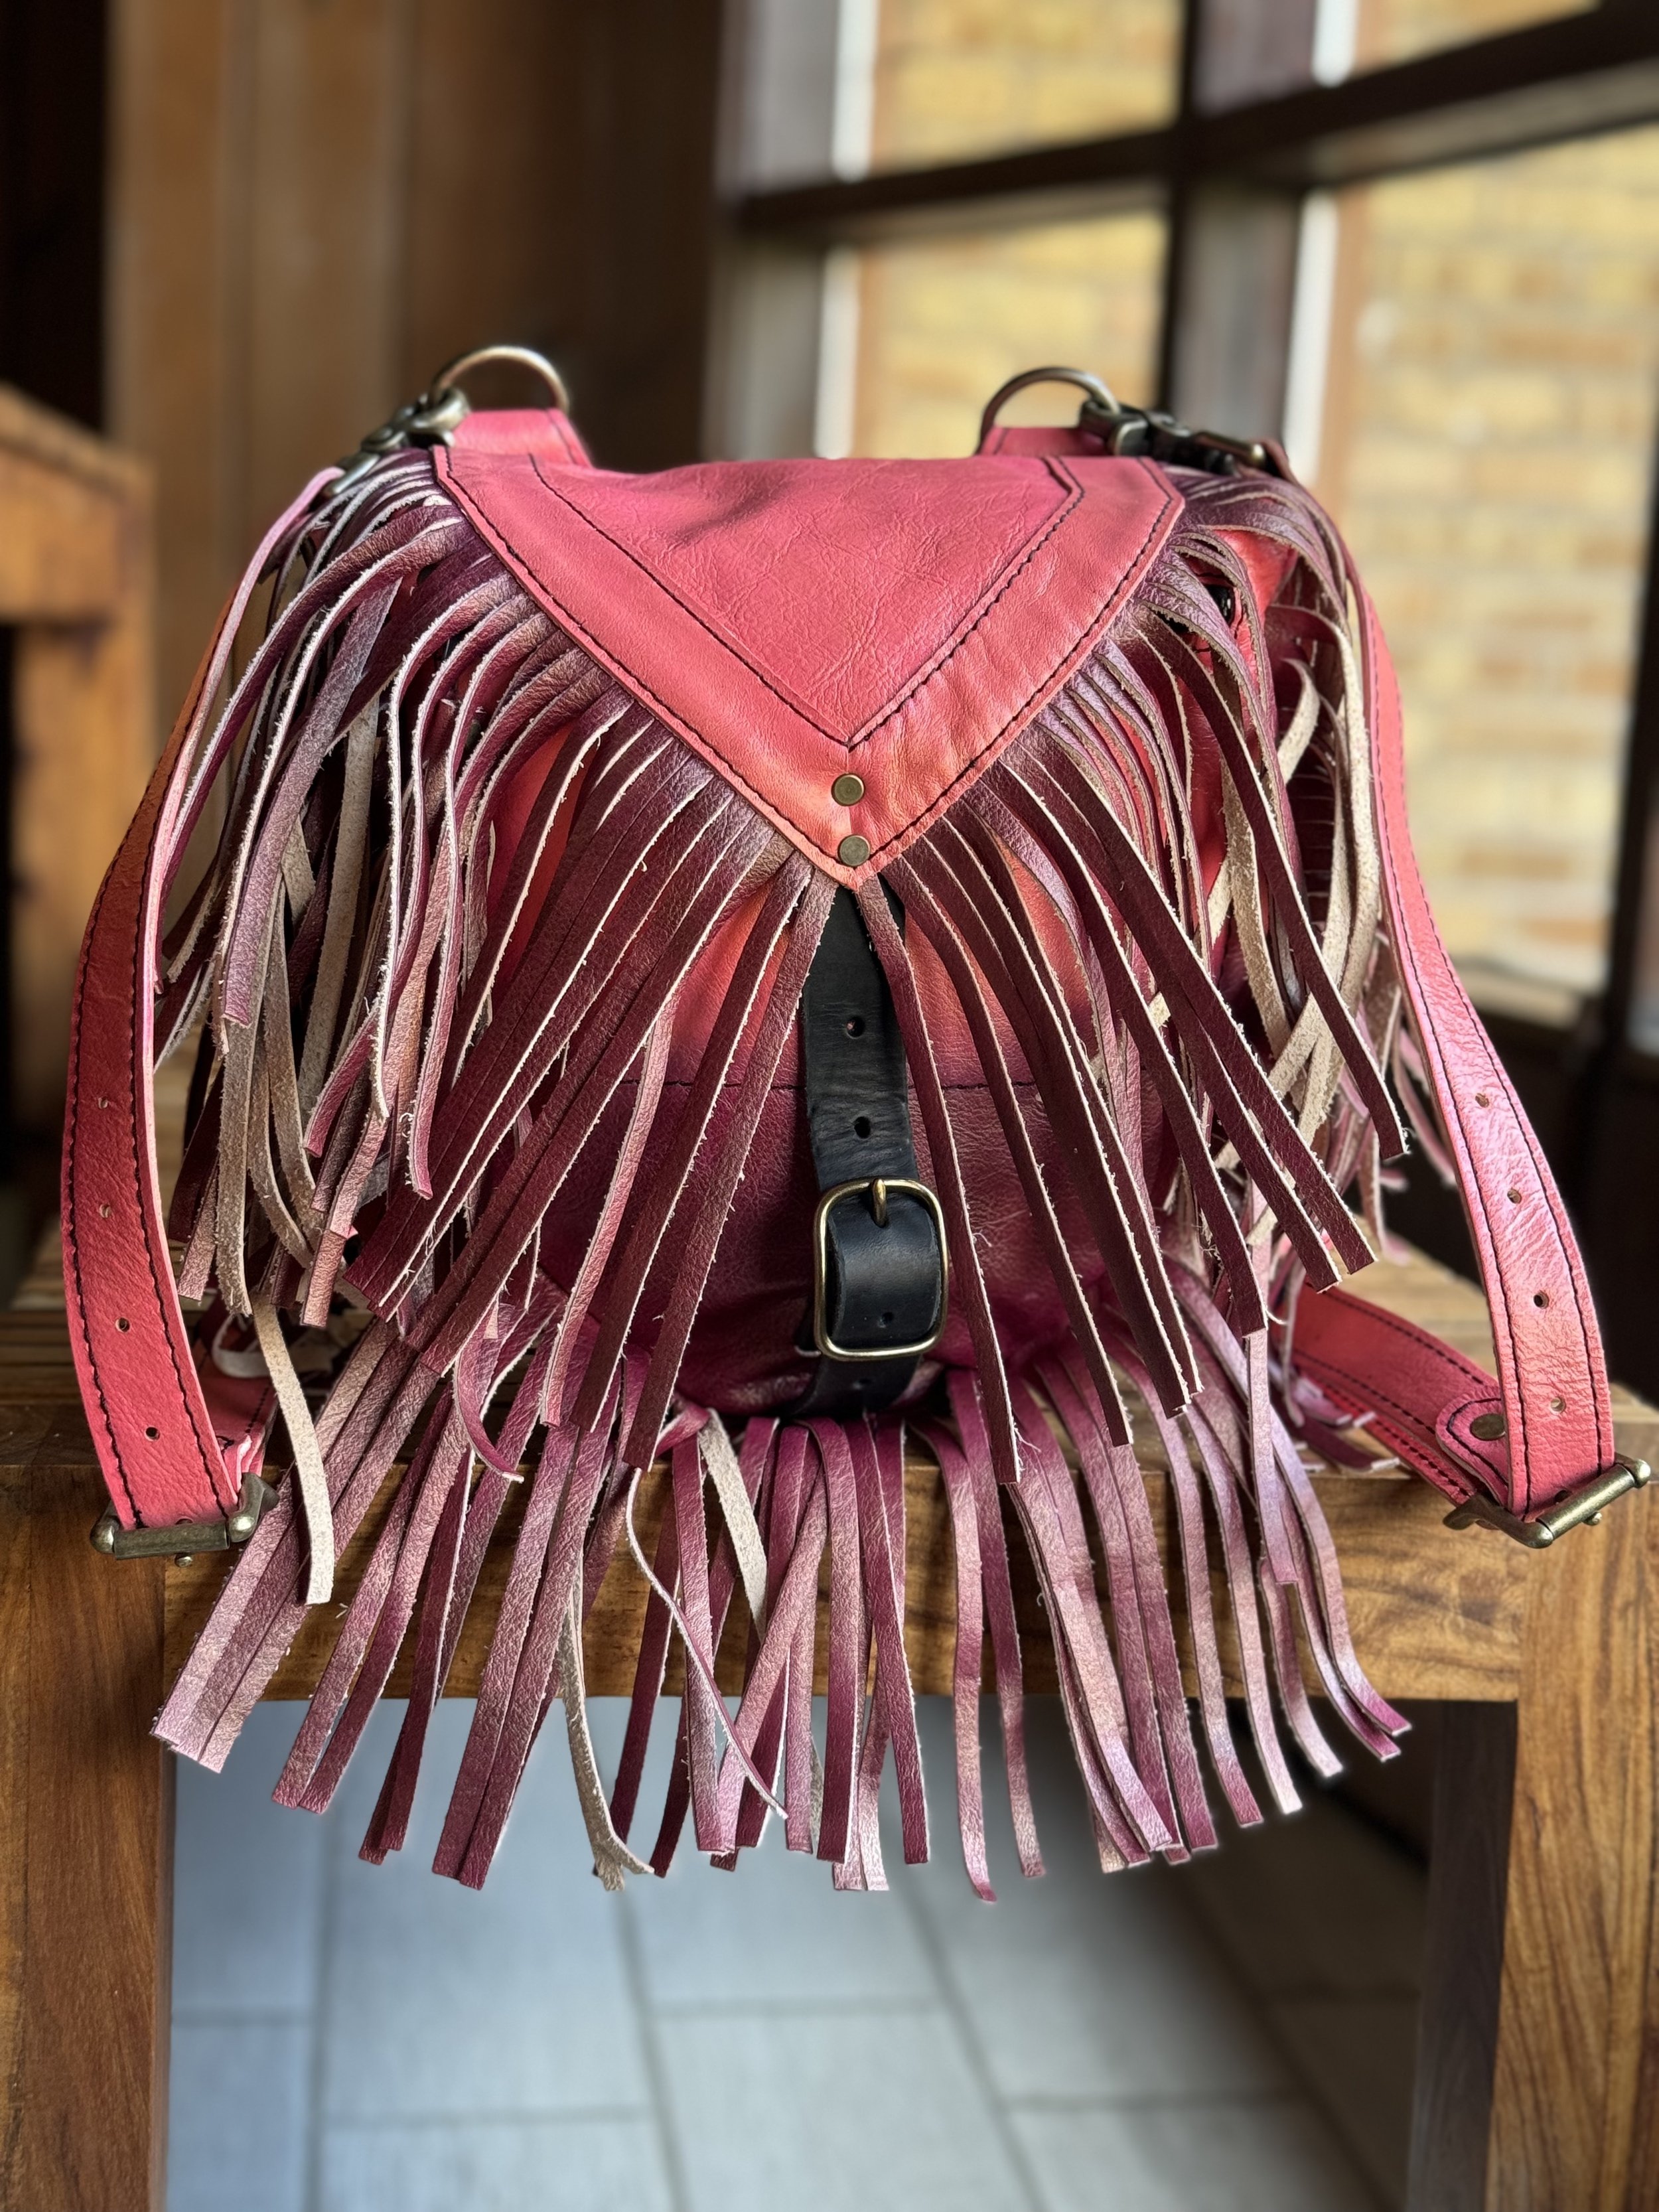 Hand dyed ombre Cheeky Gold to Glam Plum leather body, Glam Plum leather fringe, antique brass hardware - Mini Brittany Convertible Bag